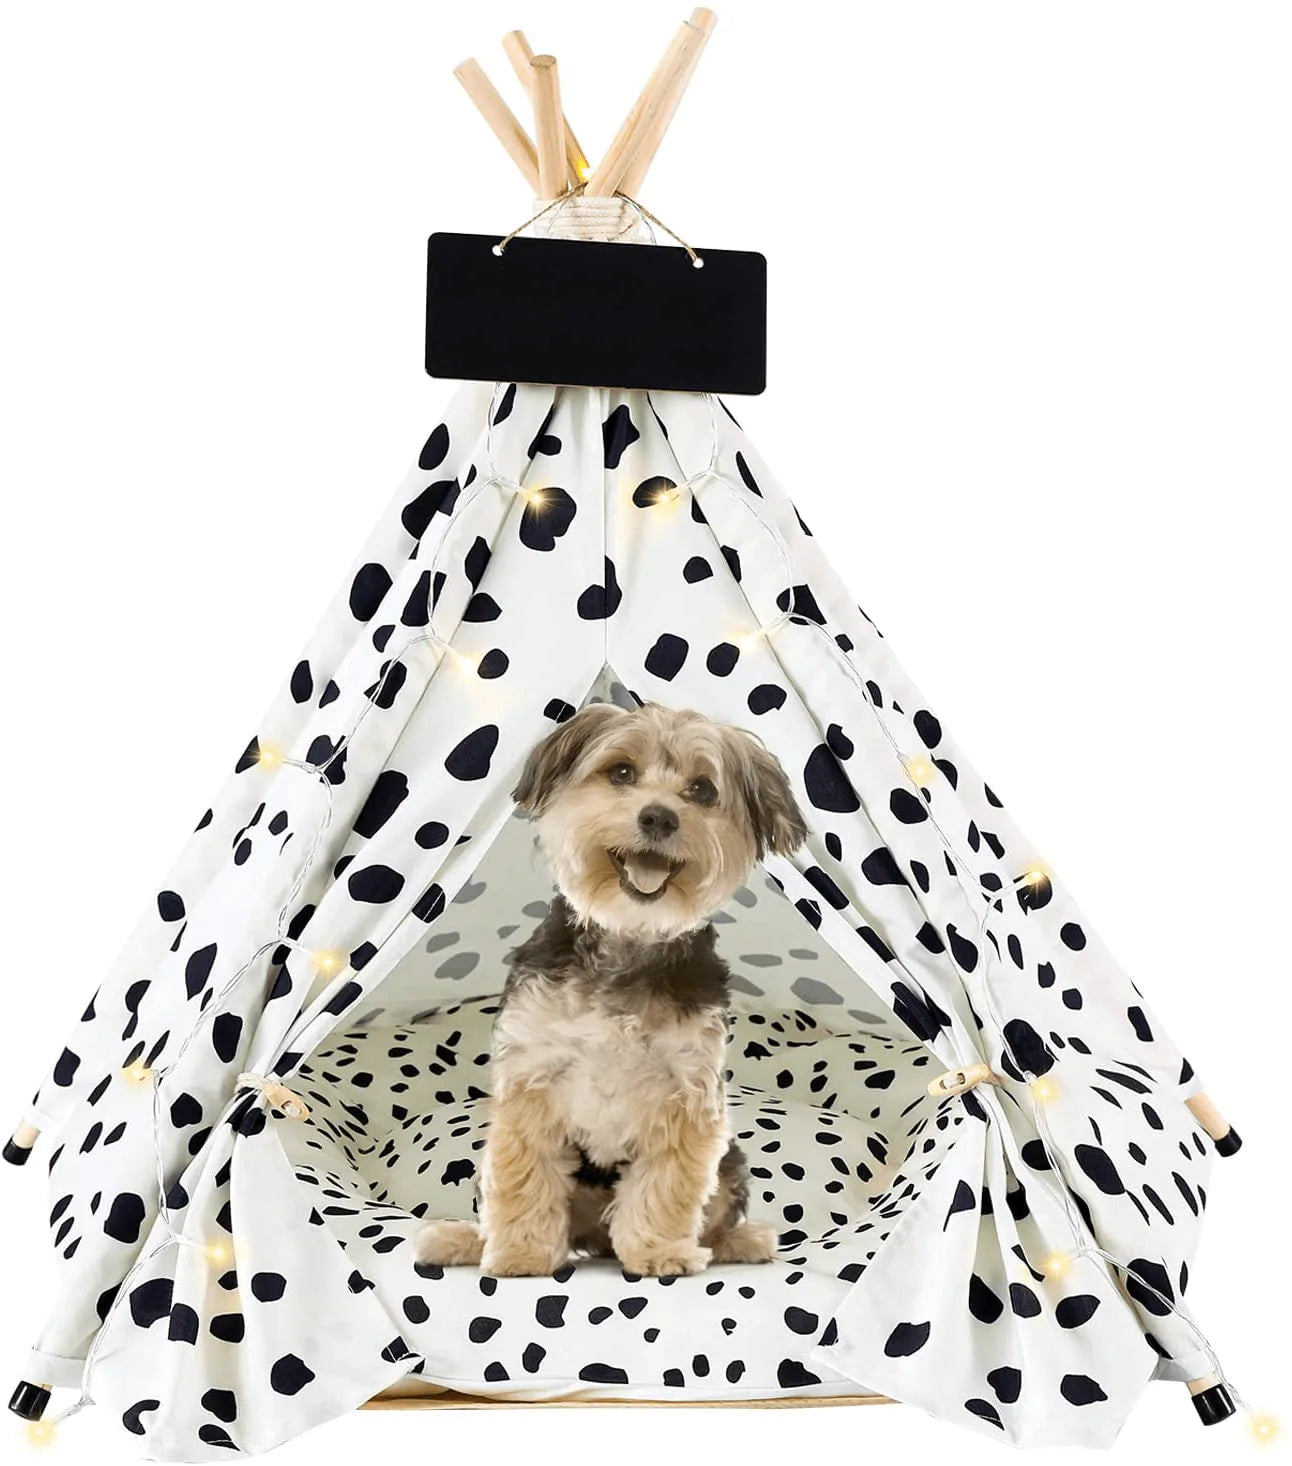 YUOUIT Pet Teepee Pet Tent with LED Light String Portable Puppy Bed for Small Dogs and Cats Folding Dogs House with Cushion for Indoor and Outdoor,Christmas,24Inches.¡­ Animals & Pet Supplies > Pet Supplies > Dog Supplies > Dog Houses YUOUIT Black and White  